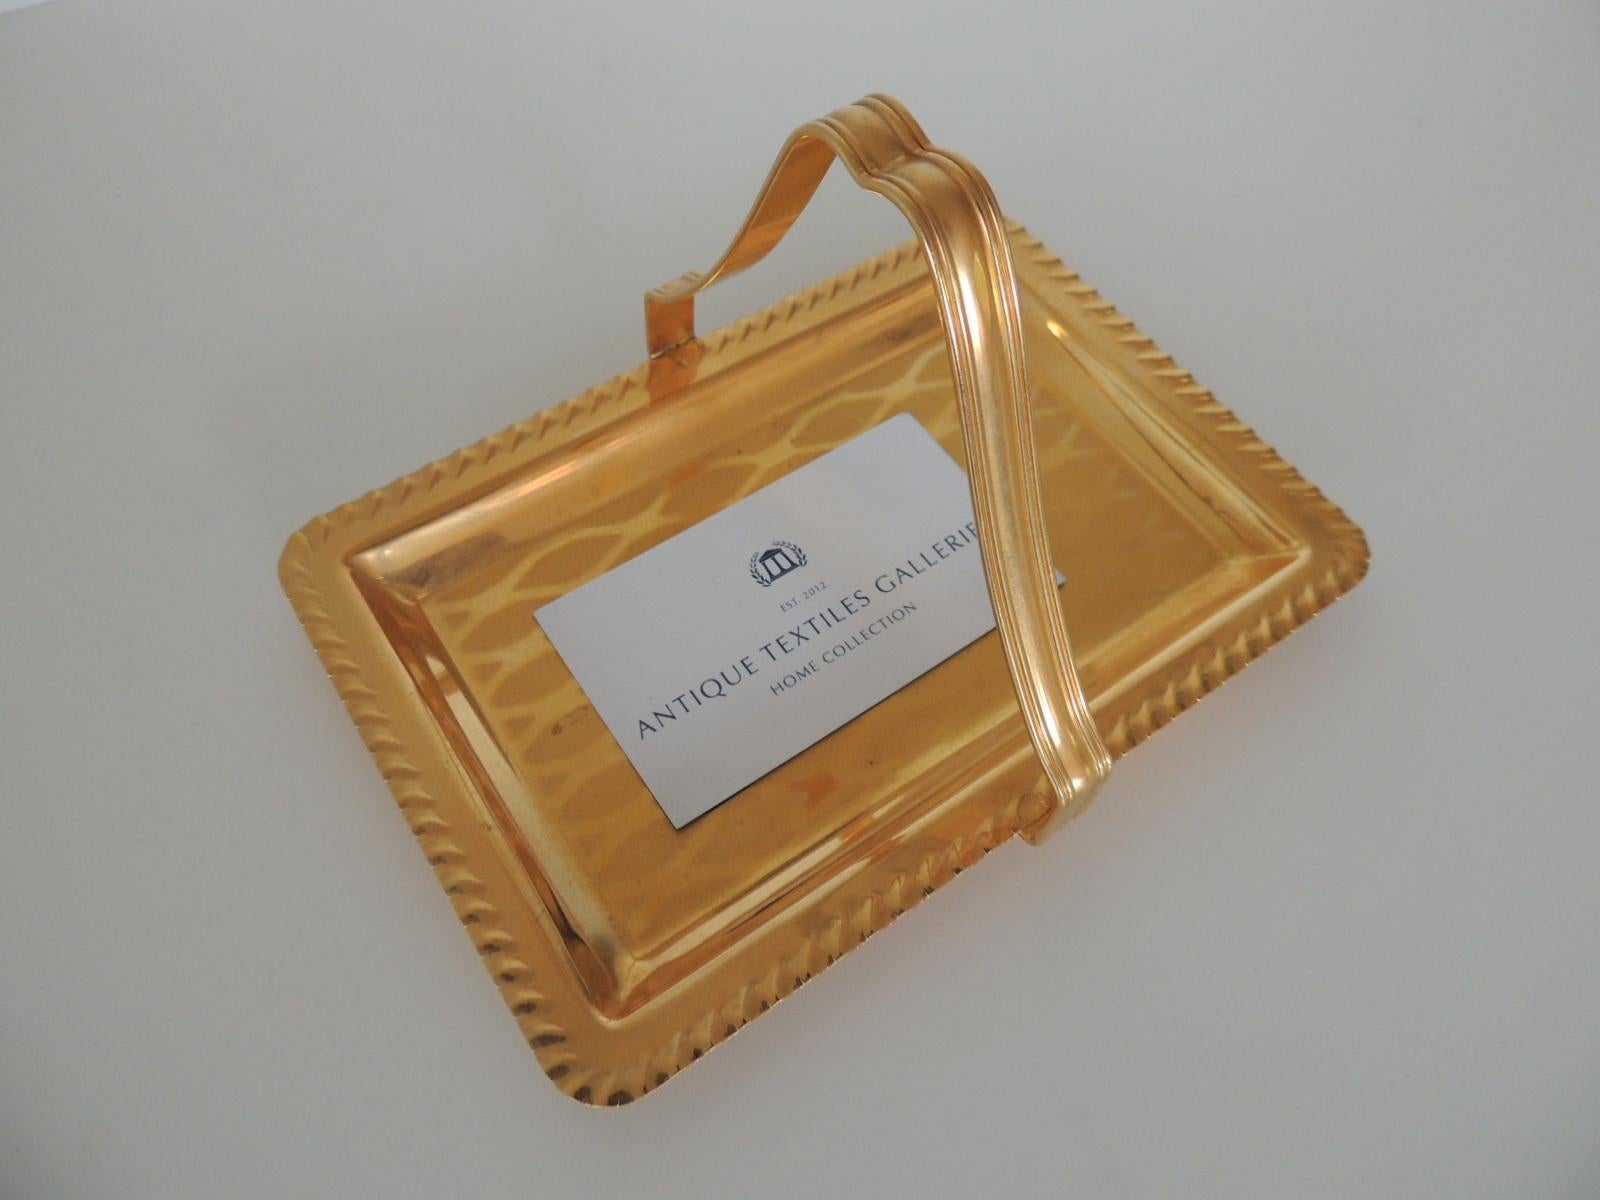 Gold desk business card holder or Tray with Handle
Trellis pattern design inset and pinched border around the tray.
Size: 4.3/4